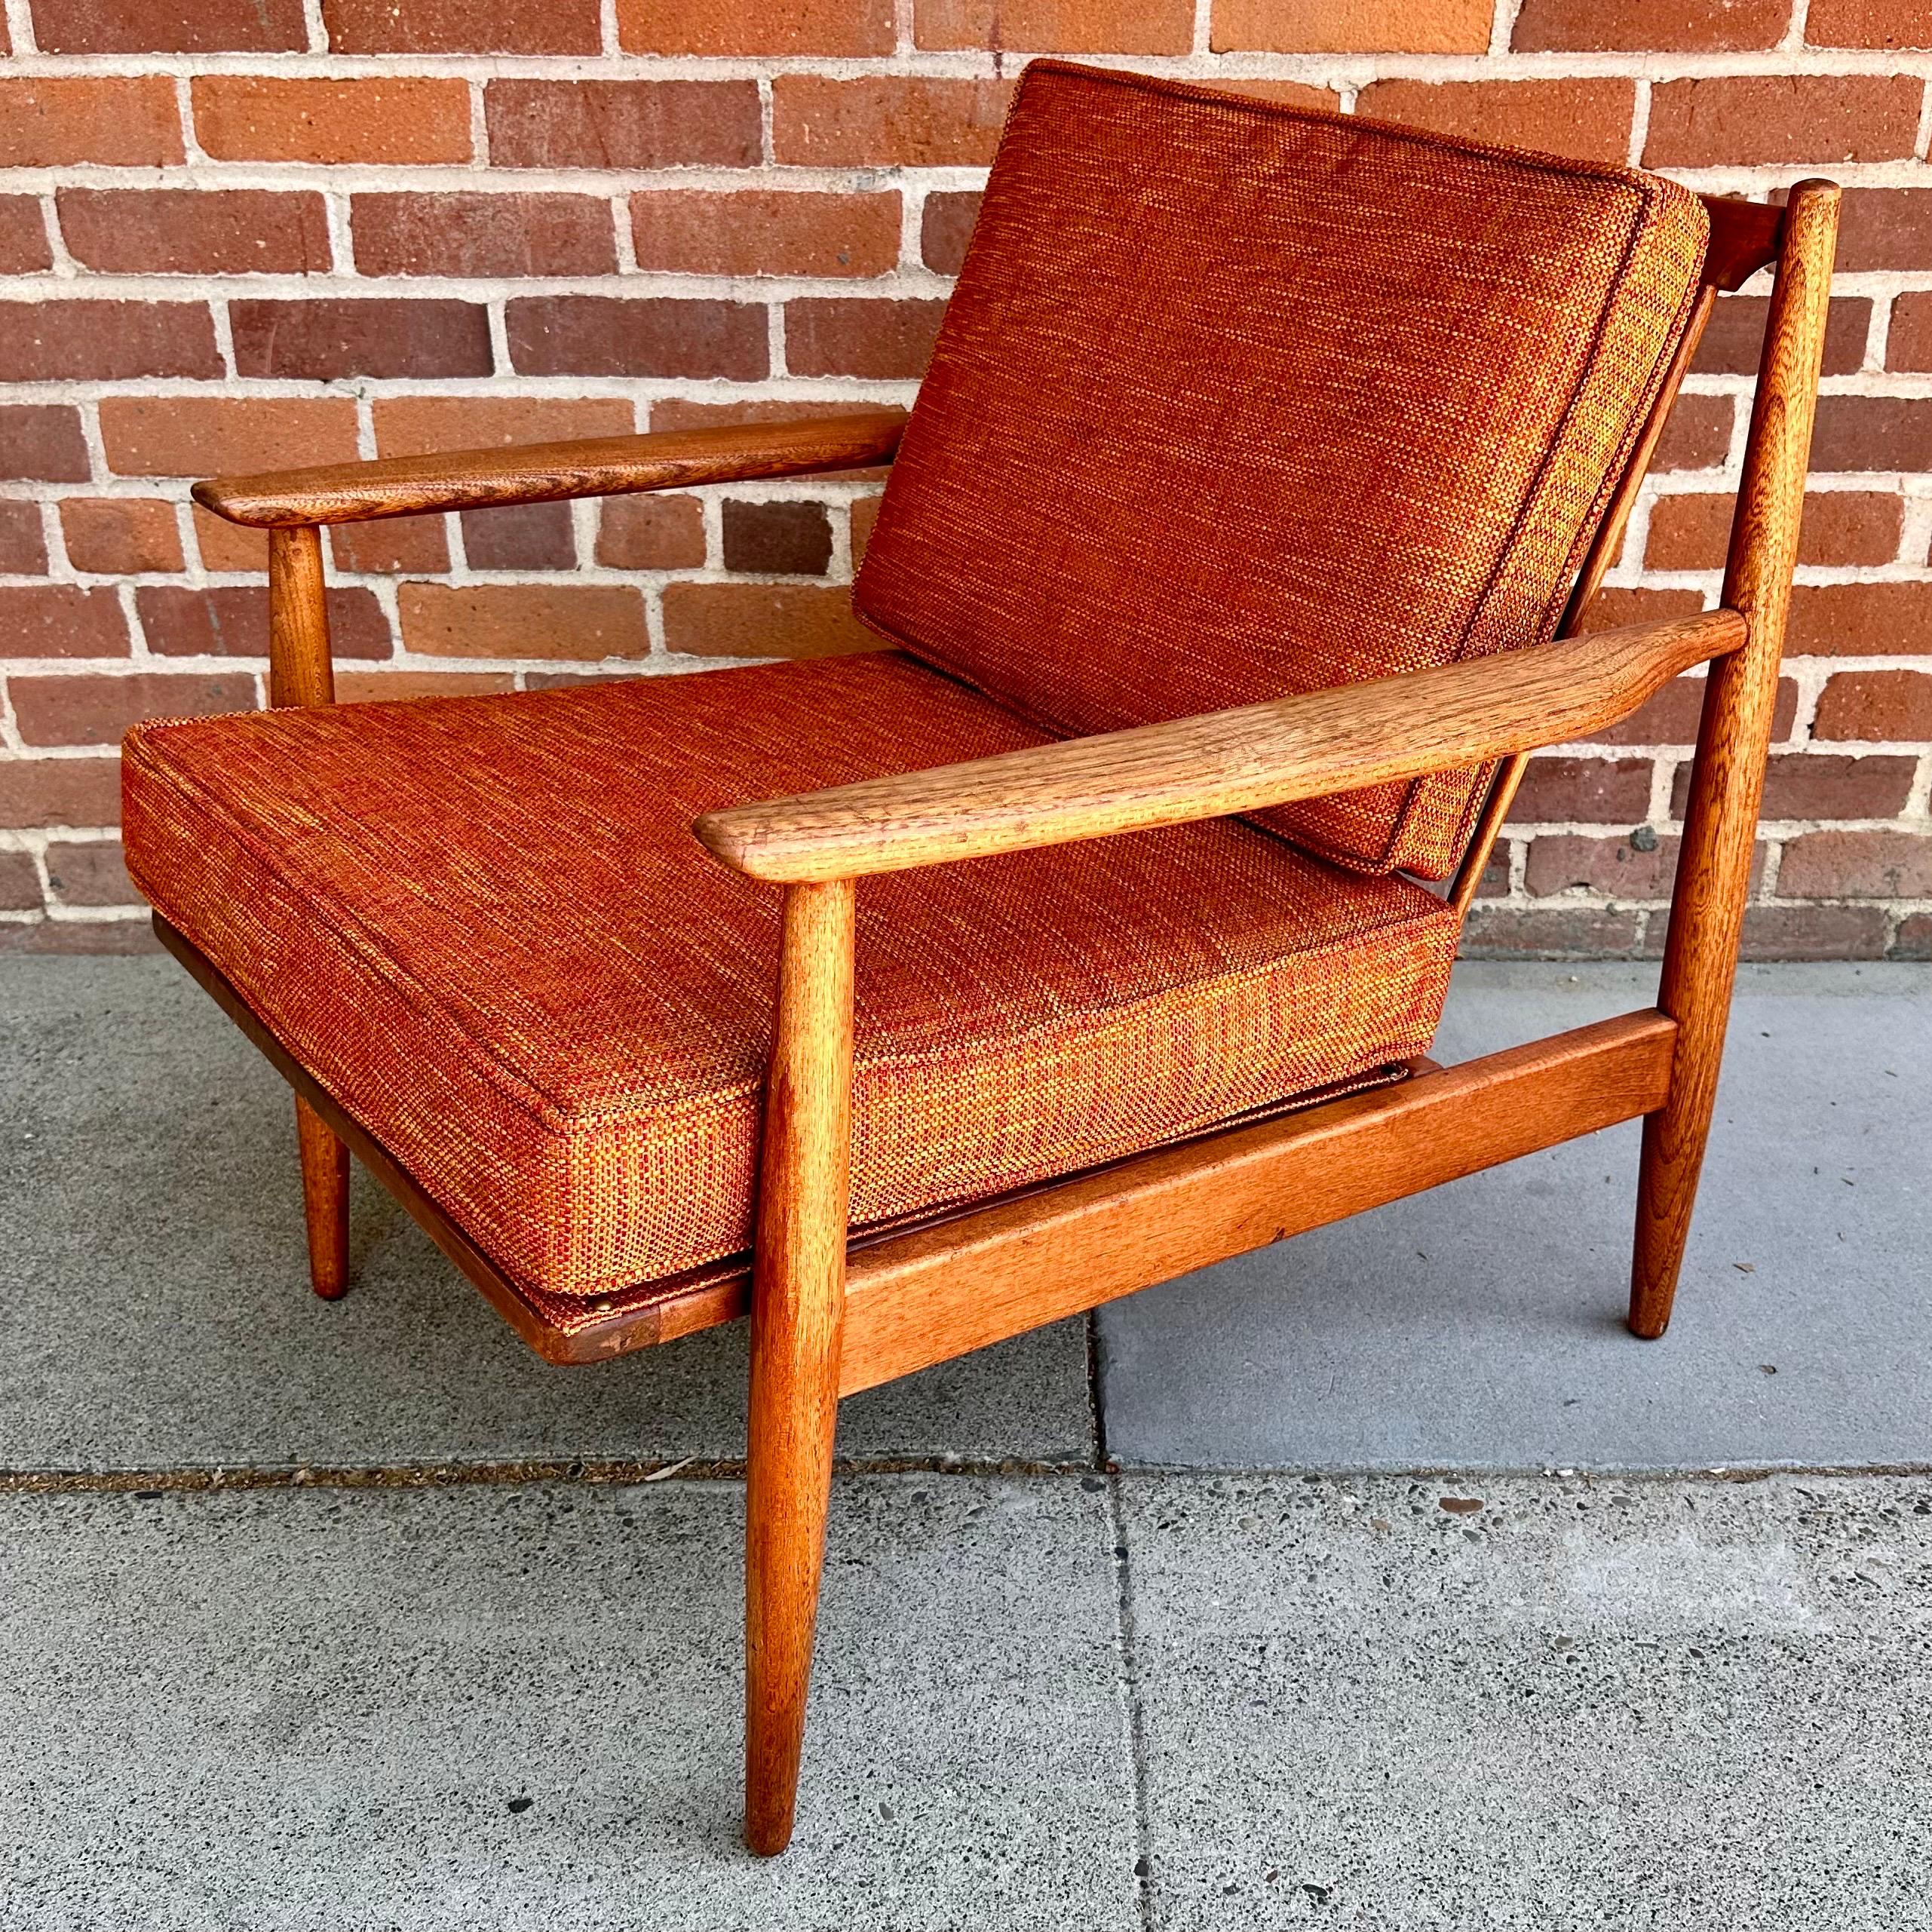 1960s Danish Modern teak lounge chair, professionally reupholstered with new foam and orange fabric. The chair is in good vintage condition, with light wear consistent with age and use. 

Width: 27.5 in / Depth: 30 in / Height: 29.25 in / Seat